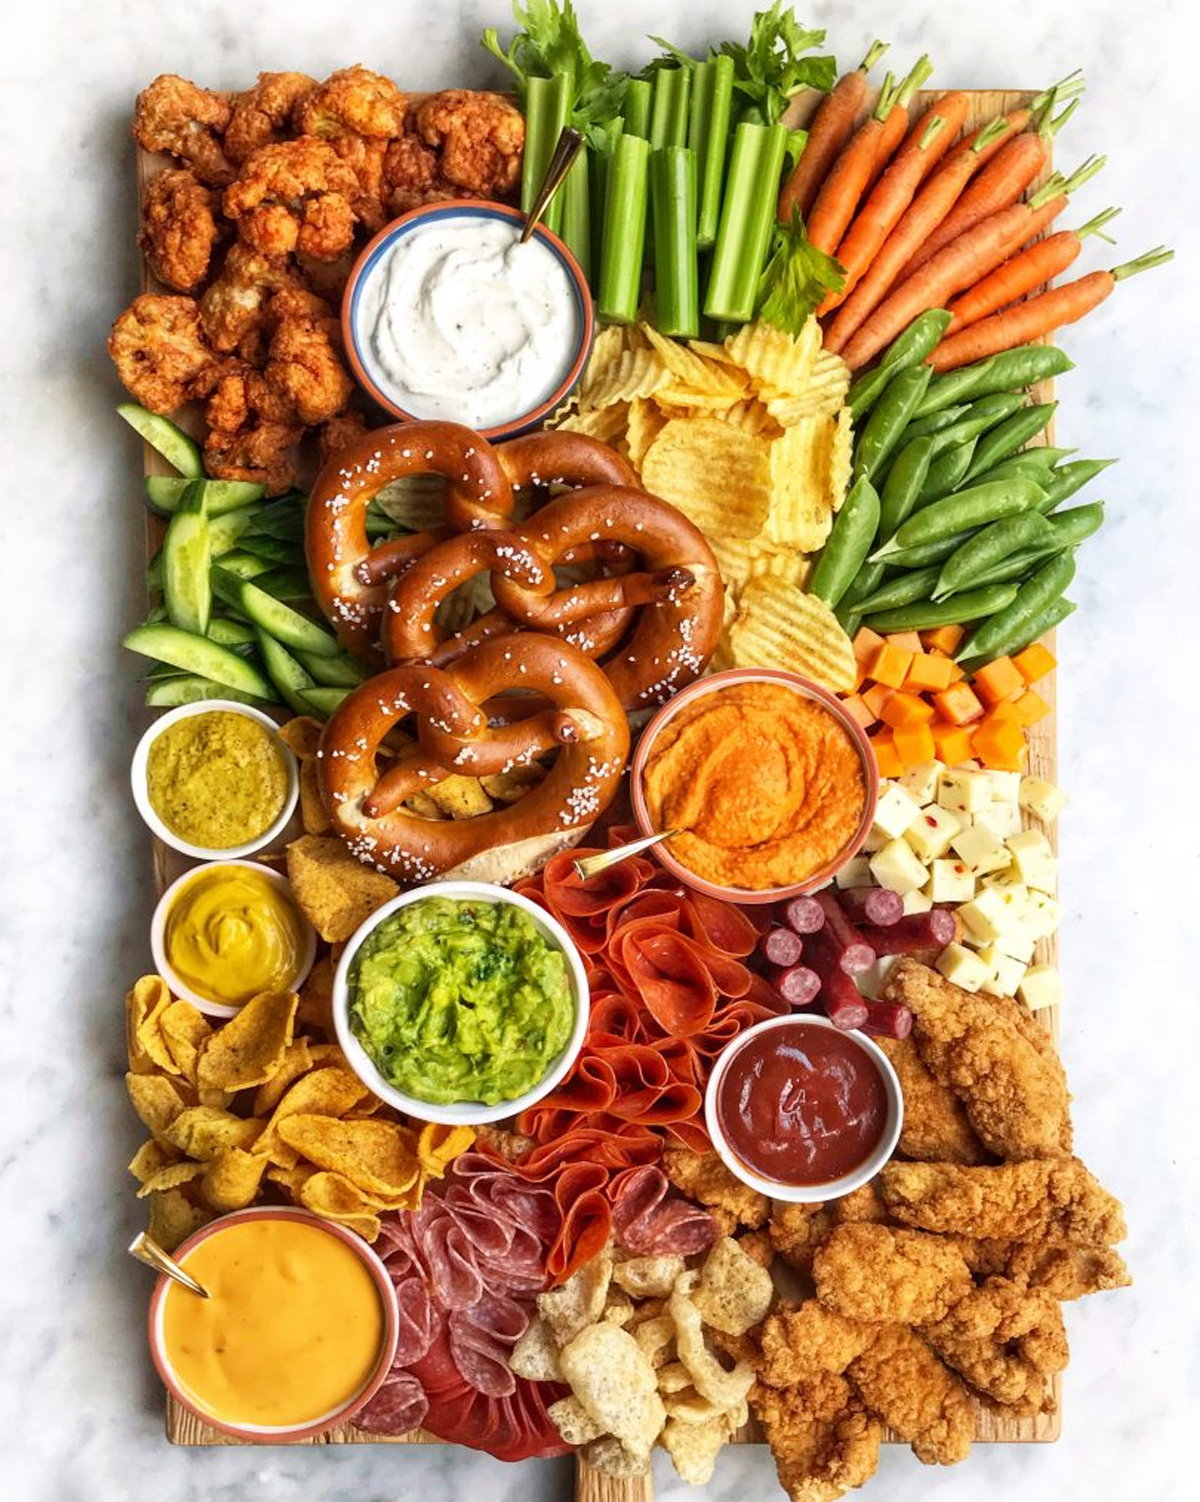 Dips, chips, cheese, crackers, meat, pretzels, and veggies are included on The Delicious Life charcuterie board.